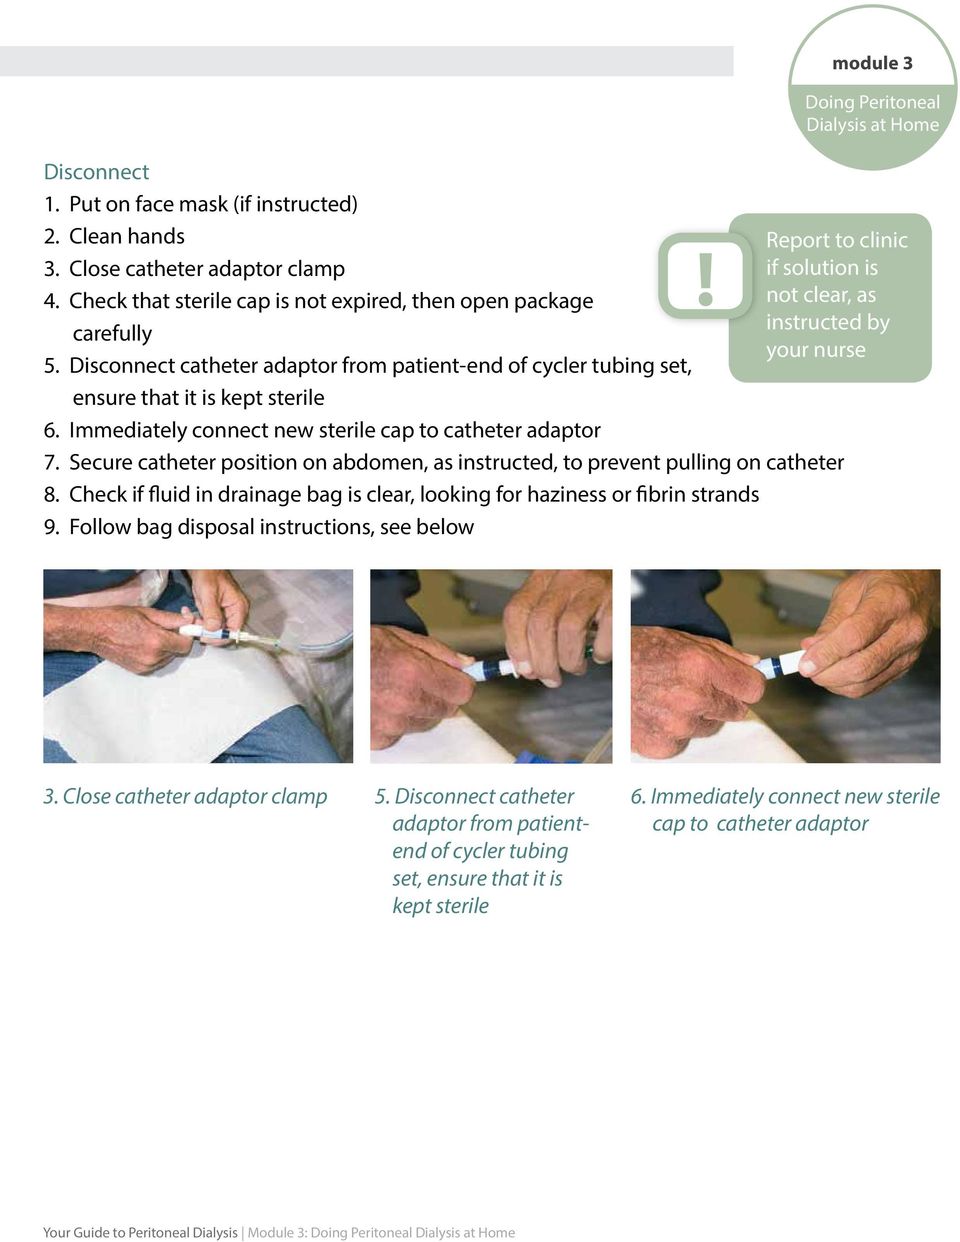 Immediately connect new sterile cap to catheter adaptor 7. Secure catheter position on abdomen, as instructed, to prevent pulling on catheter 8.